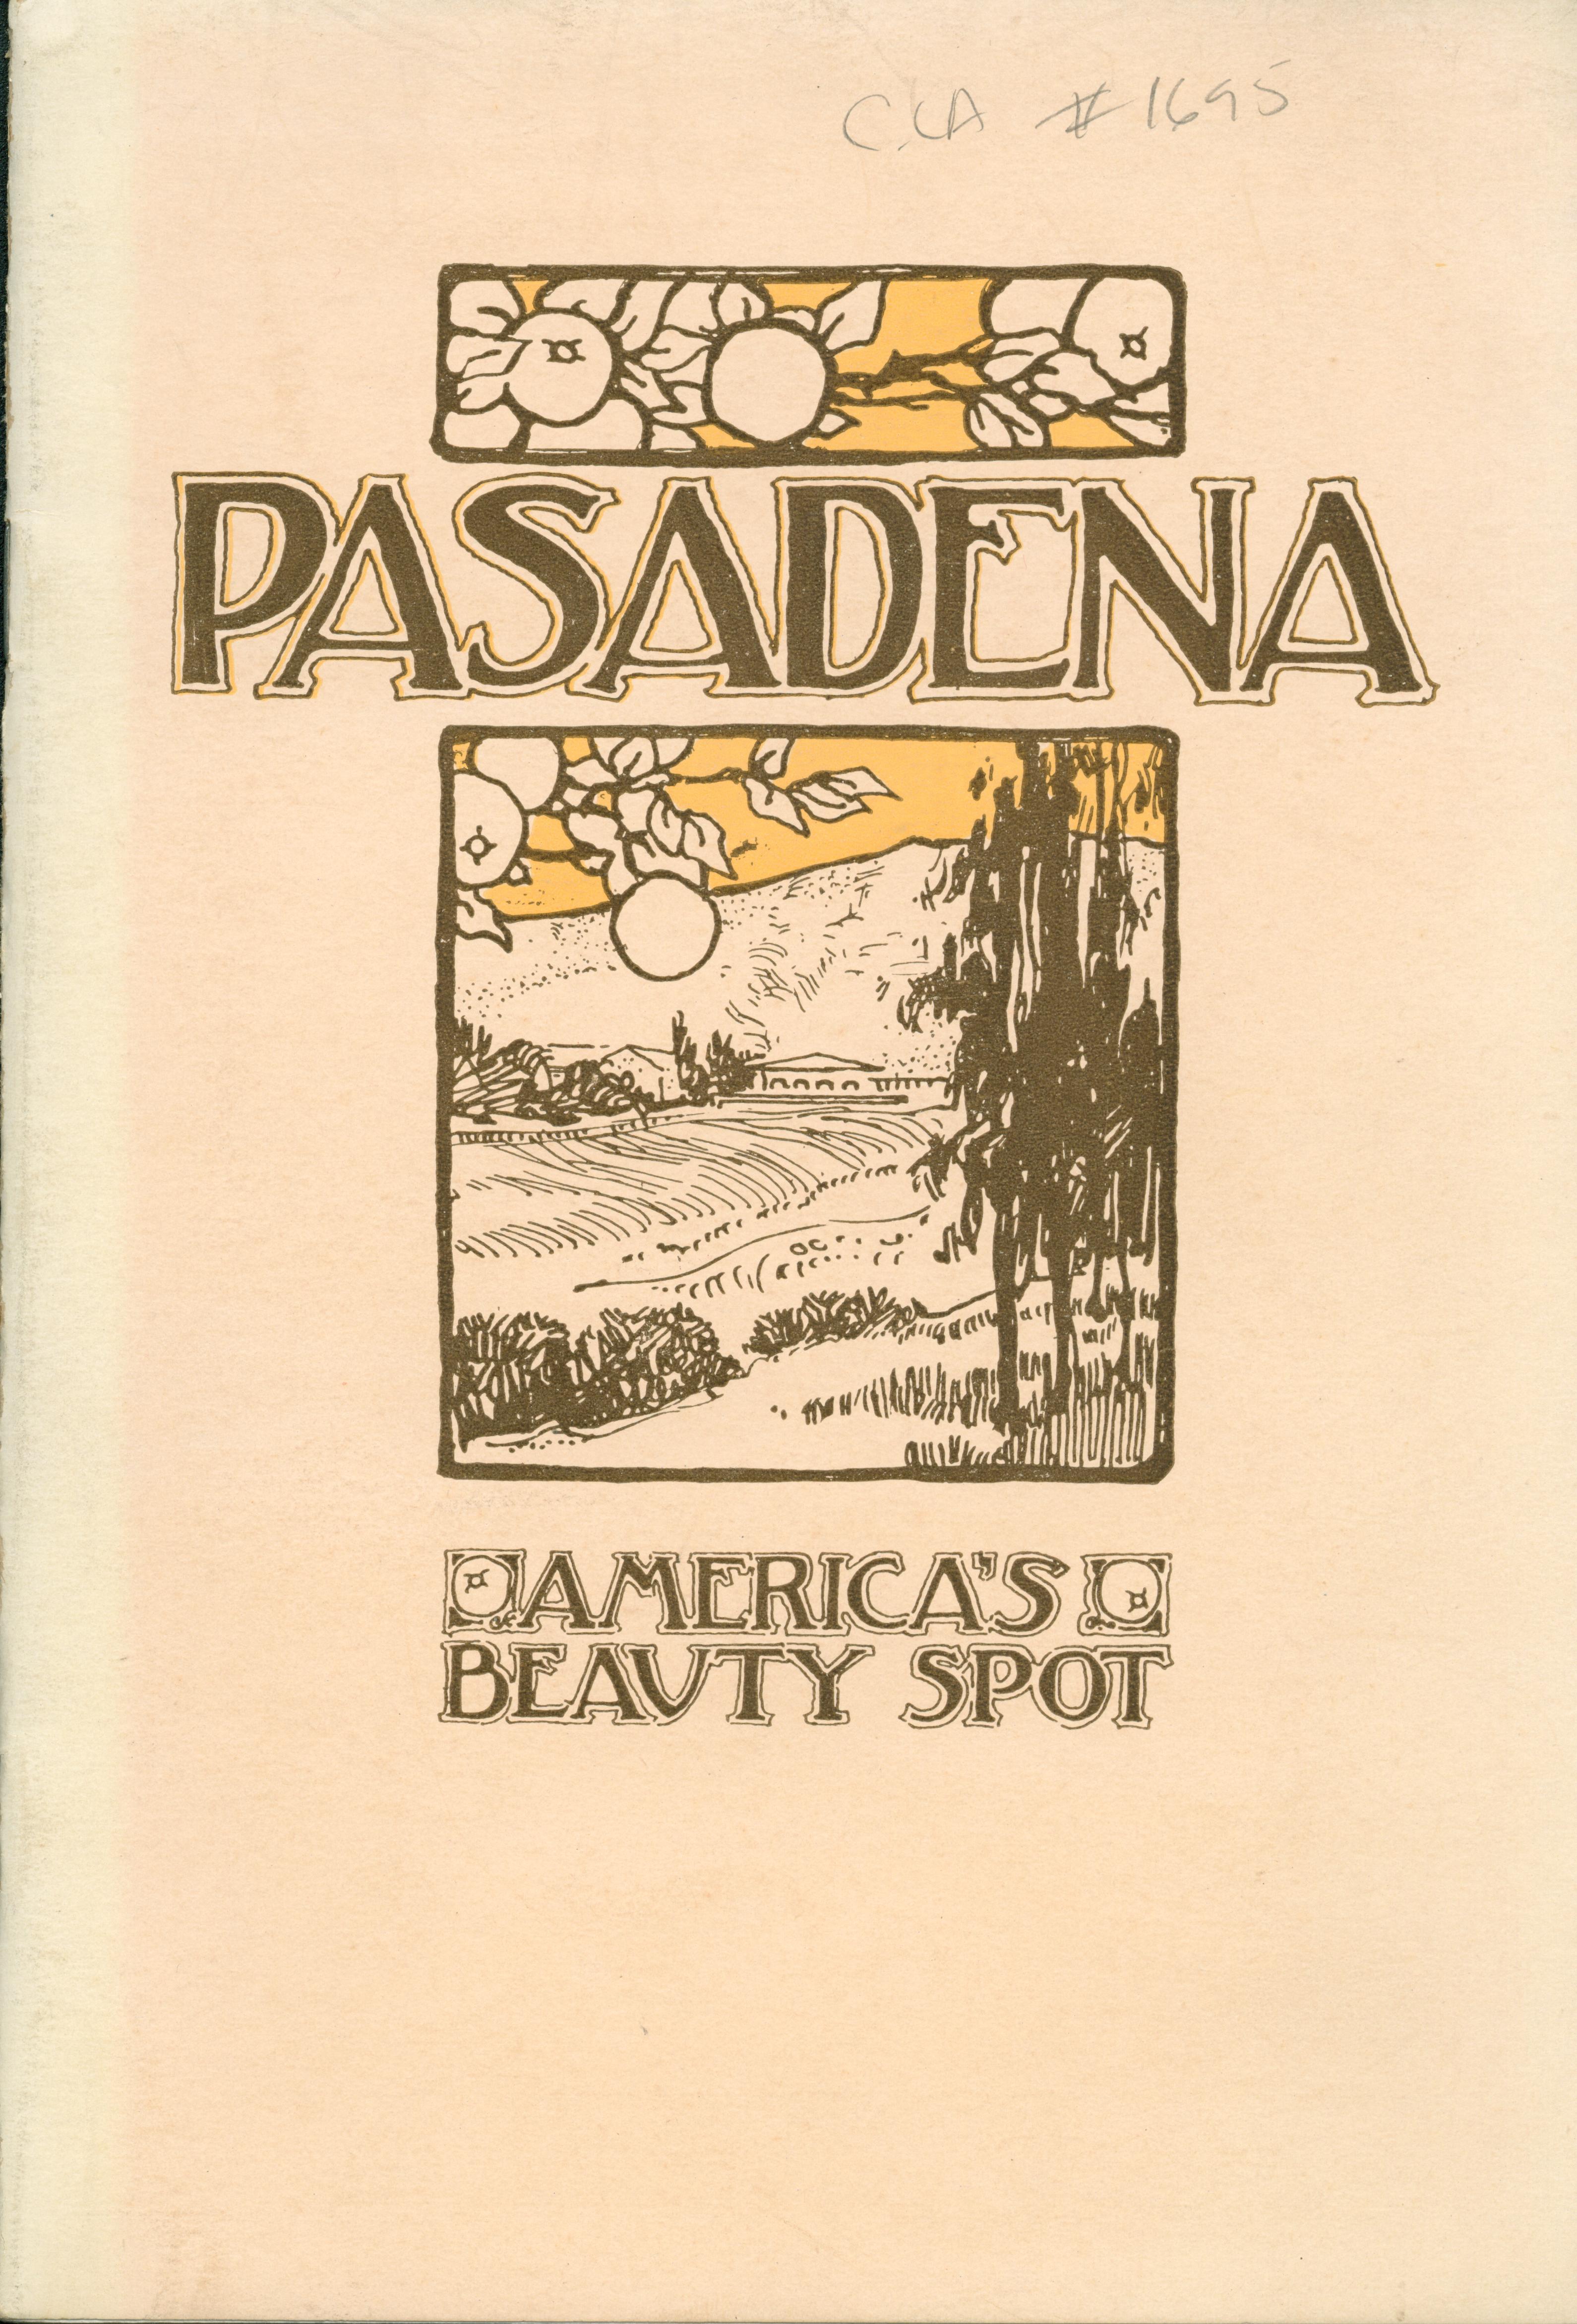 Front cover shows a woodblock print of a wilderness area with buildings and mountains in the background